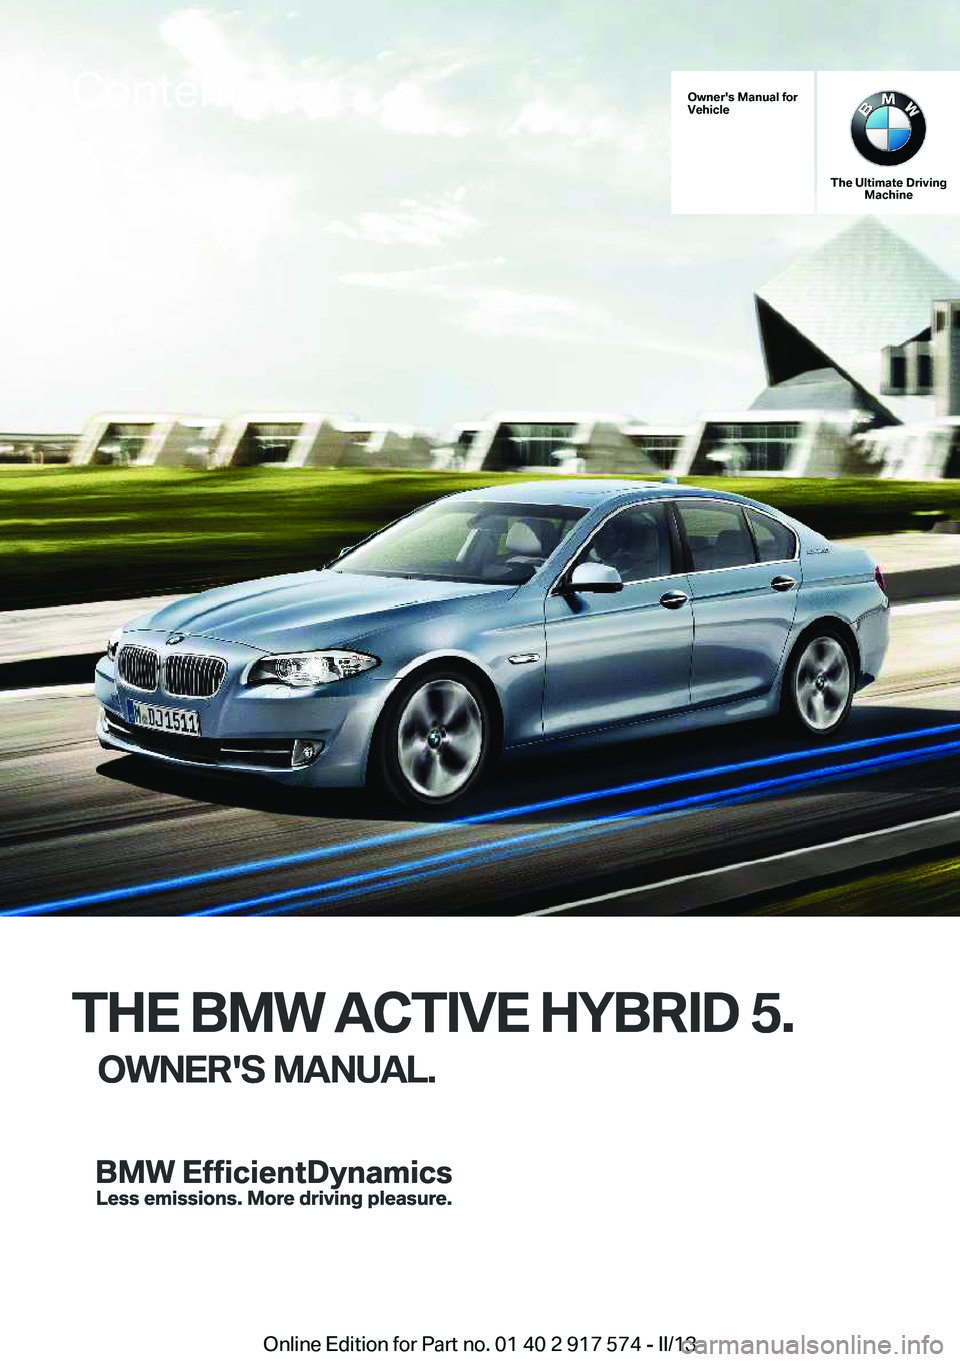 BMW ACTIVEHYBRID5 2013  Owners Manual Owner's Manual for
Vehicle
THE BMW ACTIVE HYBRID 5.
OWNER'S MANUAL.
The Ultimate Driving Machine
THE BMW ACTIVE HYBRID 5.
OWNER'S MANUAL.
ContentsA-Z
Online Edition for Part no. 01 40 2 91